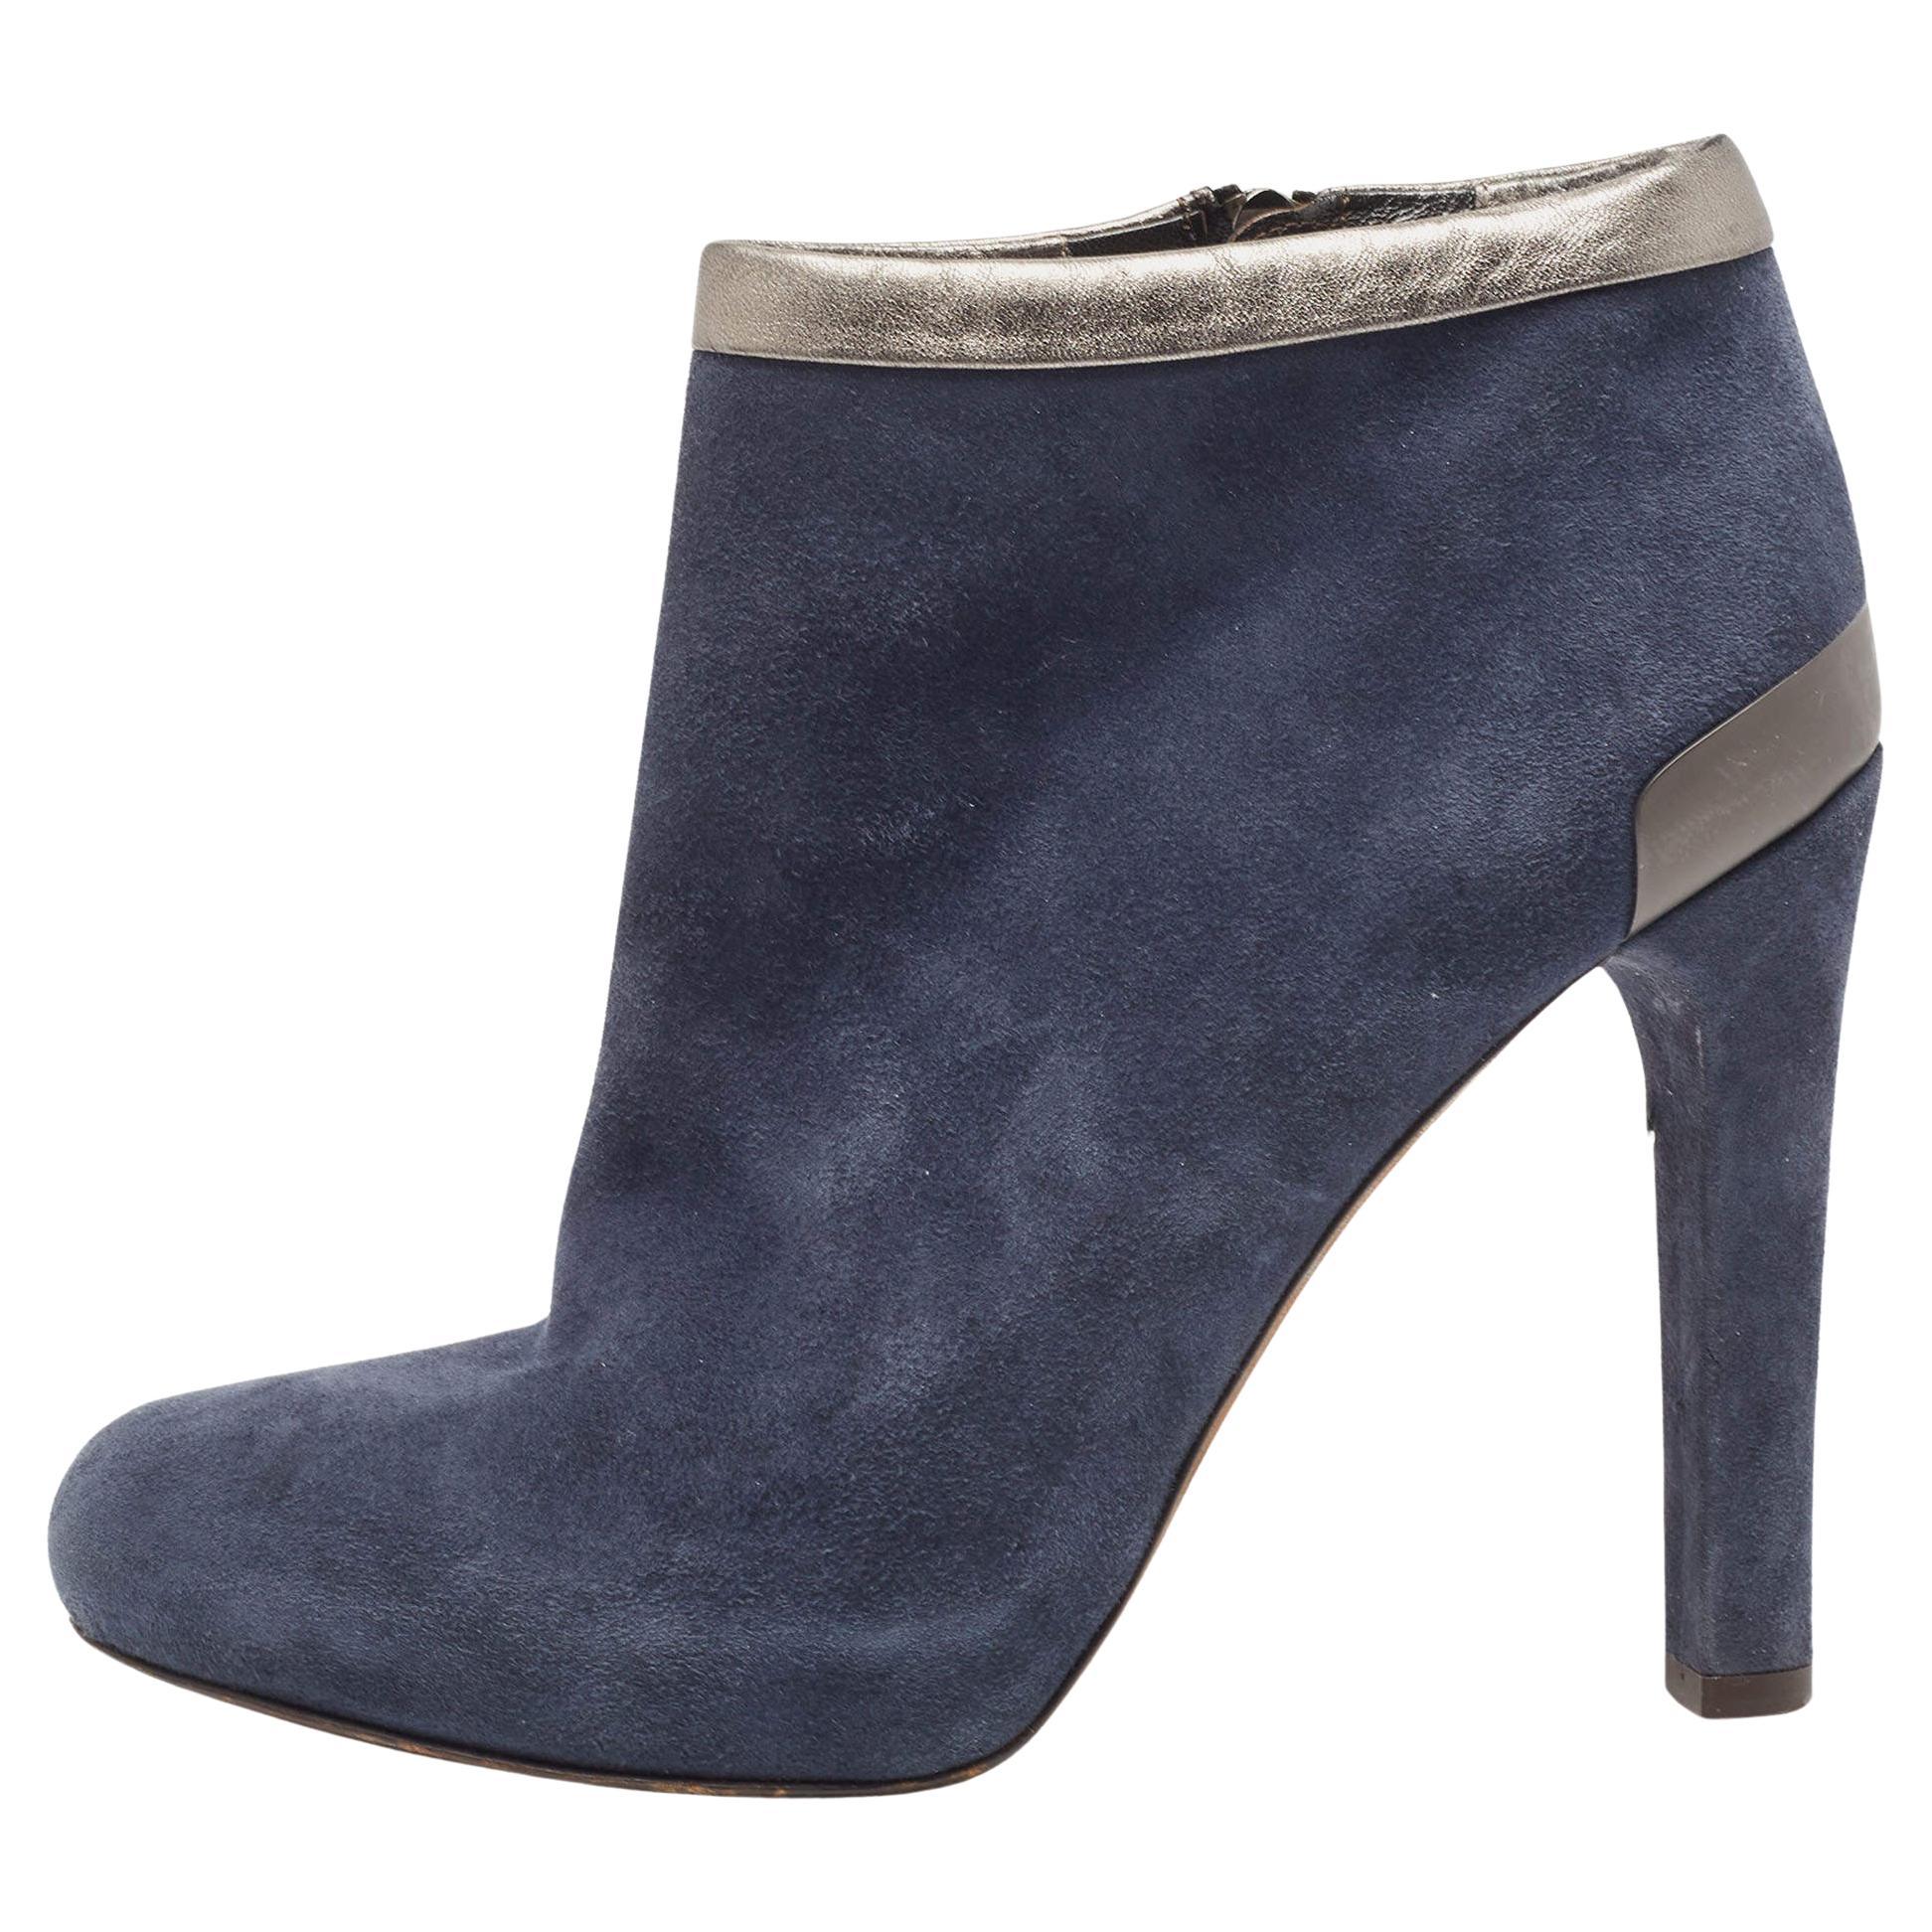 Fendi Navy Blue Suede Ankle Booties Size 39.5